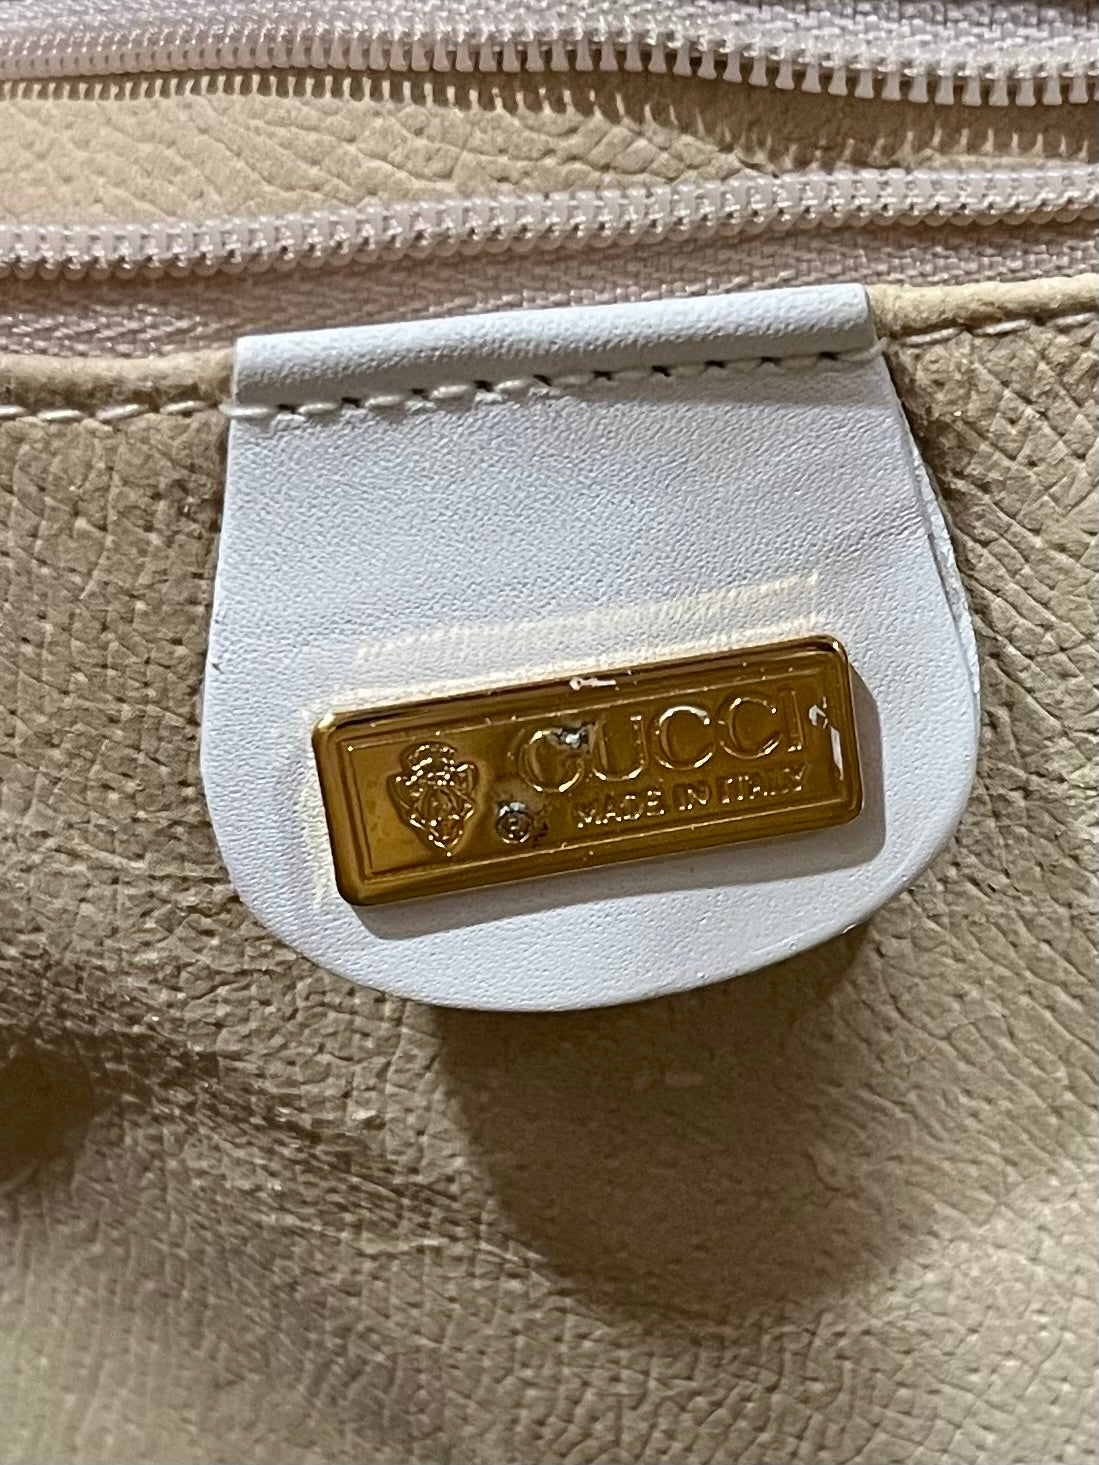 Pin on Louis Vuitton Gucci bags - Painted